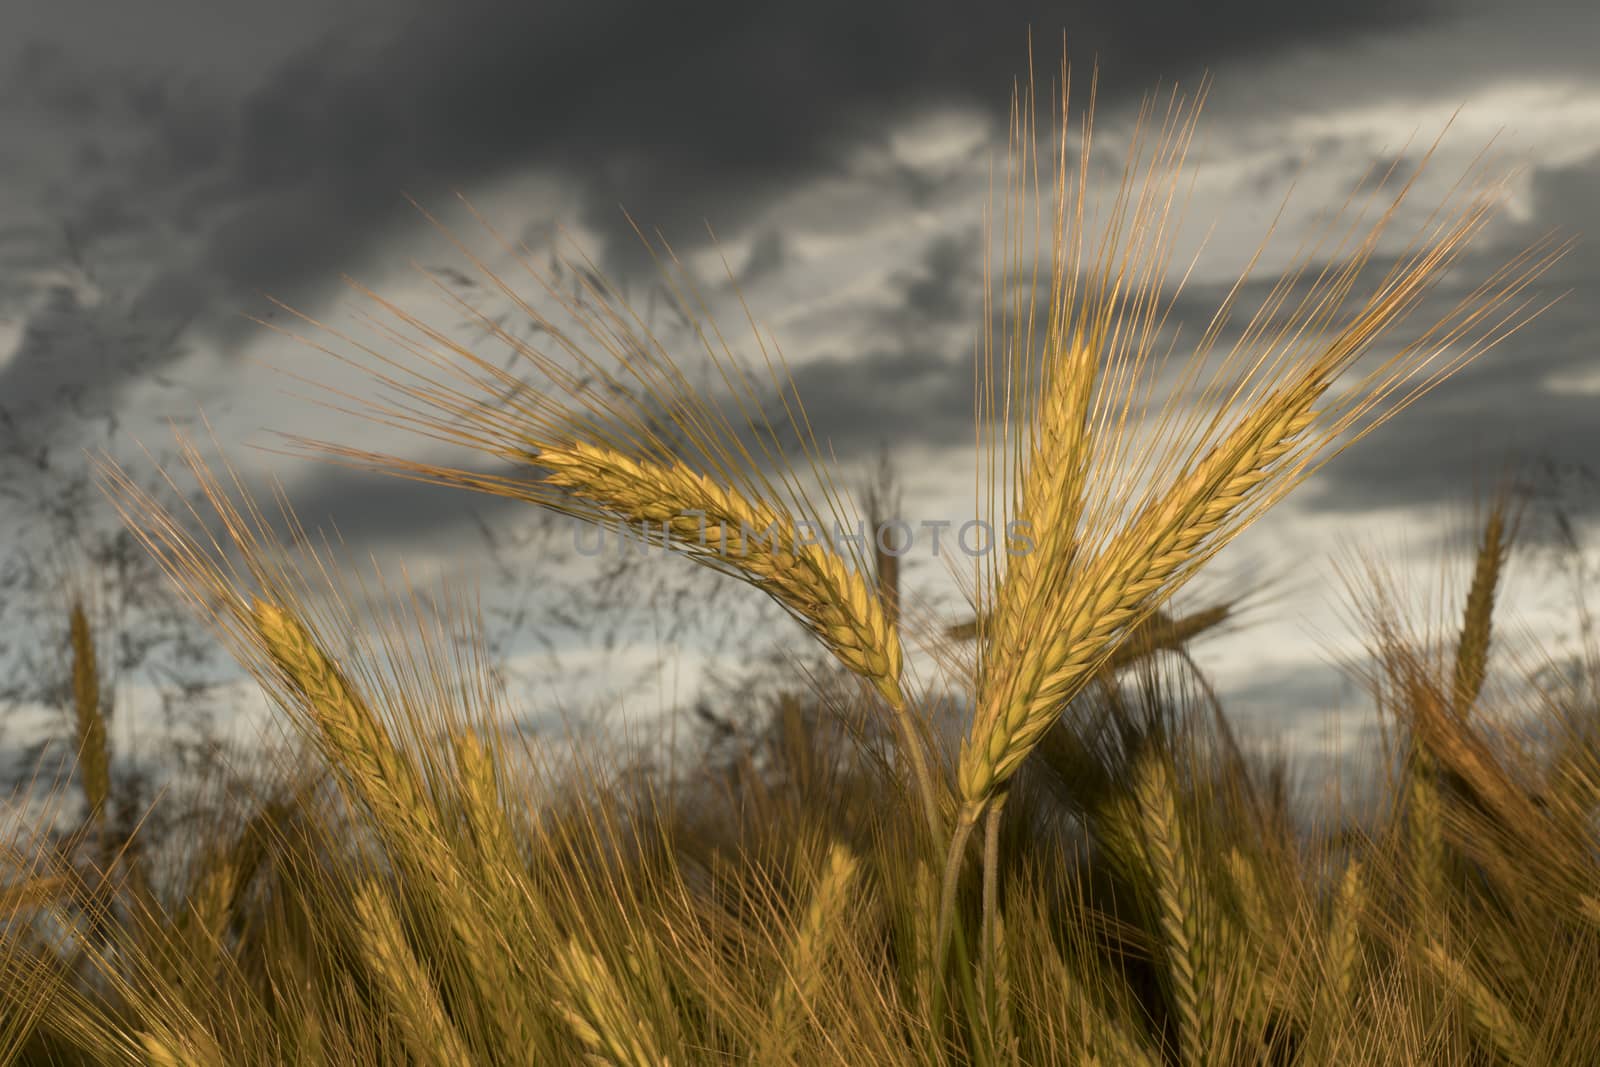 Barley in the field, closeup, selective focus on front stems, dark background sky